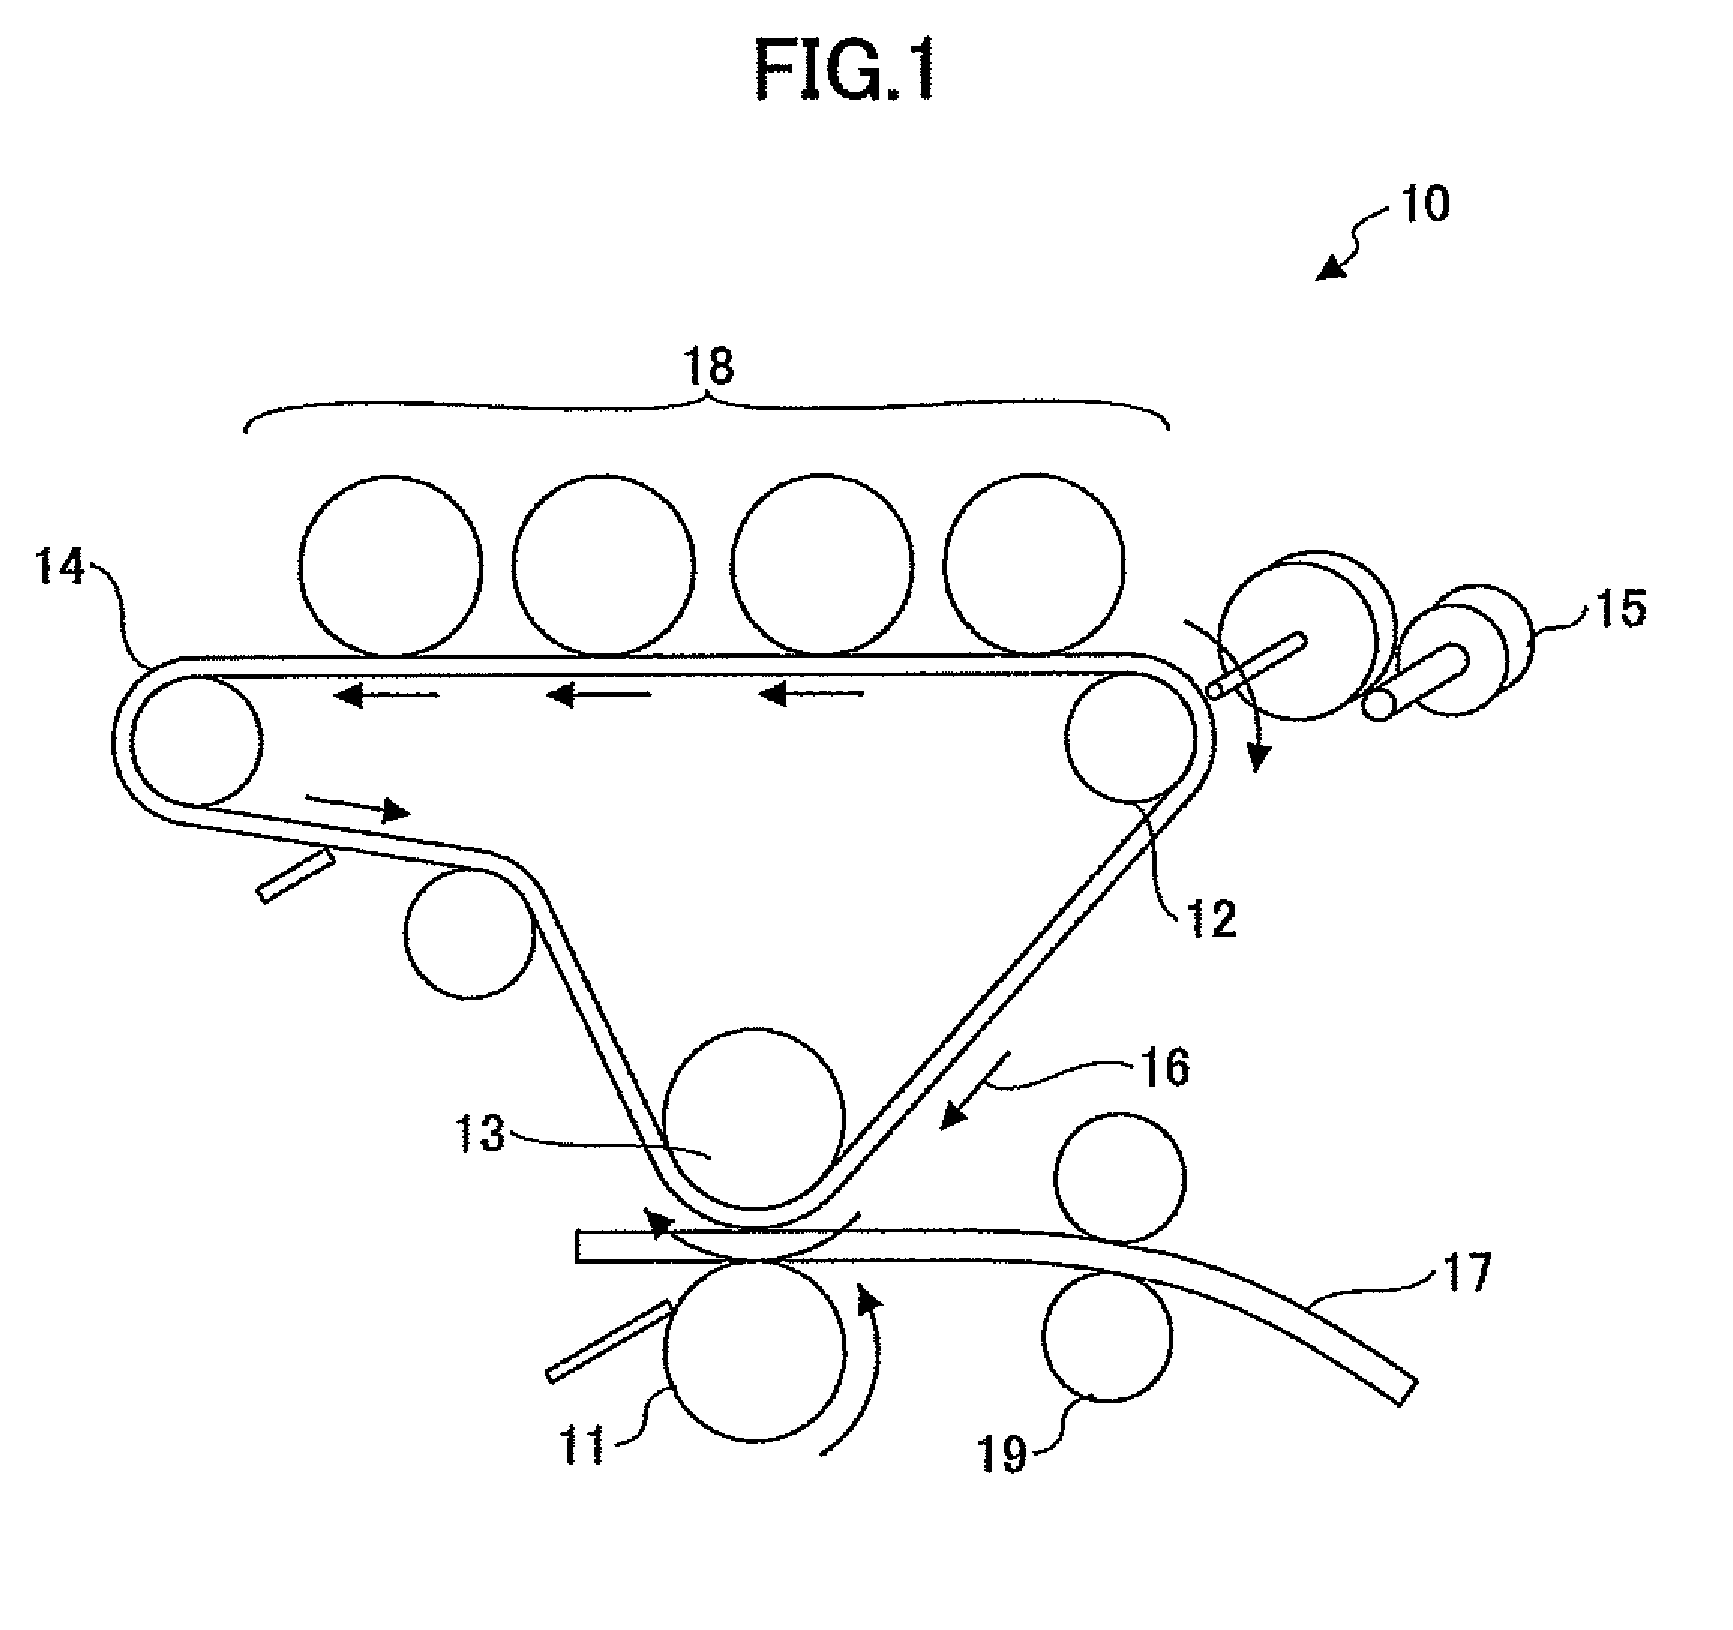 Image forming device adapted to control speed difference between first rotary member and second rotary member